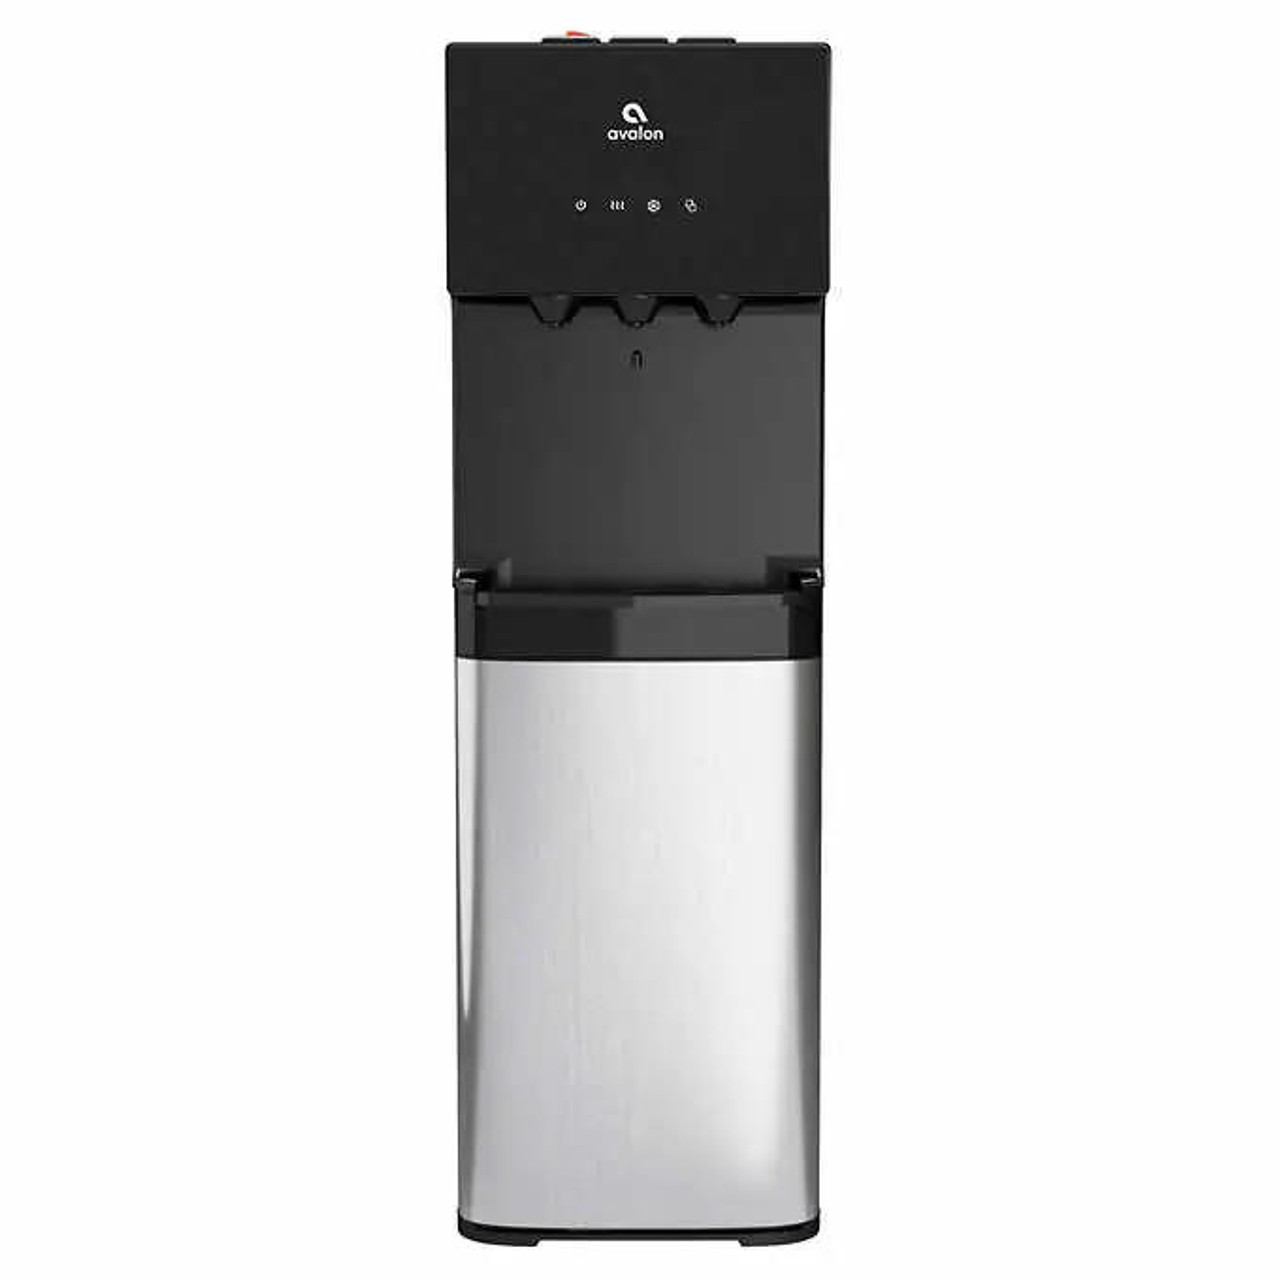  Avalon Stainless Steel, Child Safety Lock Bottom-Loading Water Cooler 